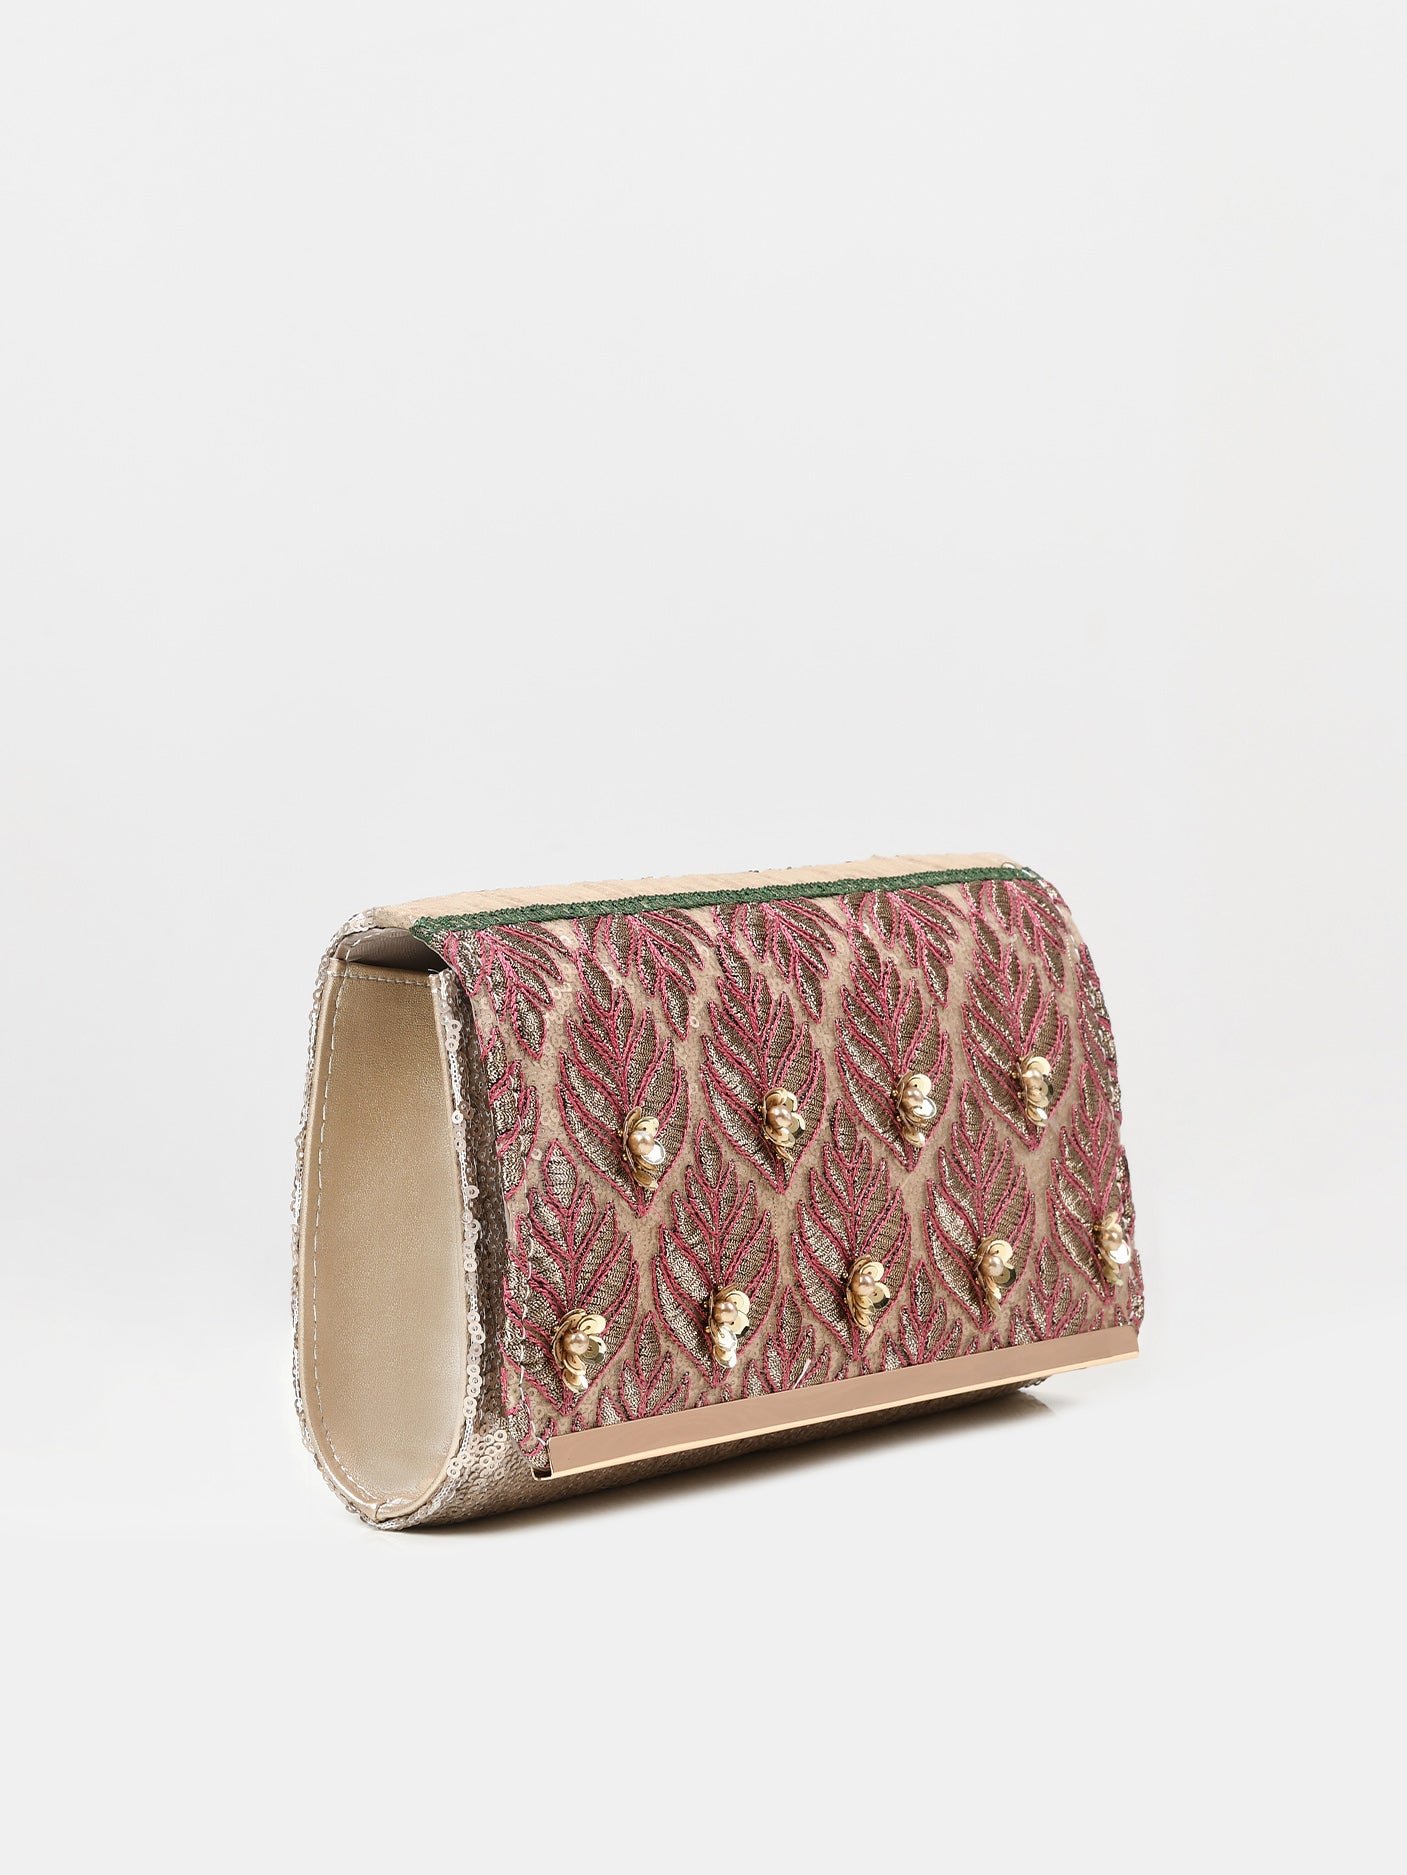 Embroidered Sequin Clutch